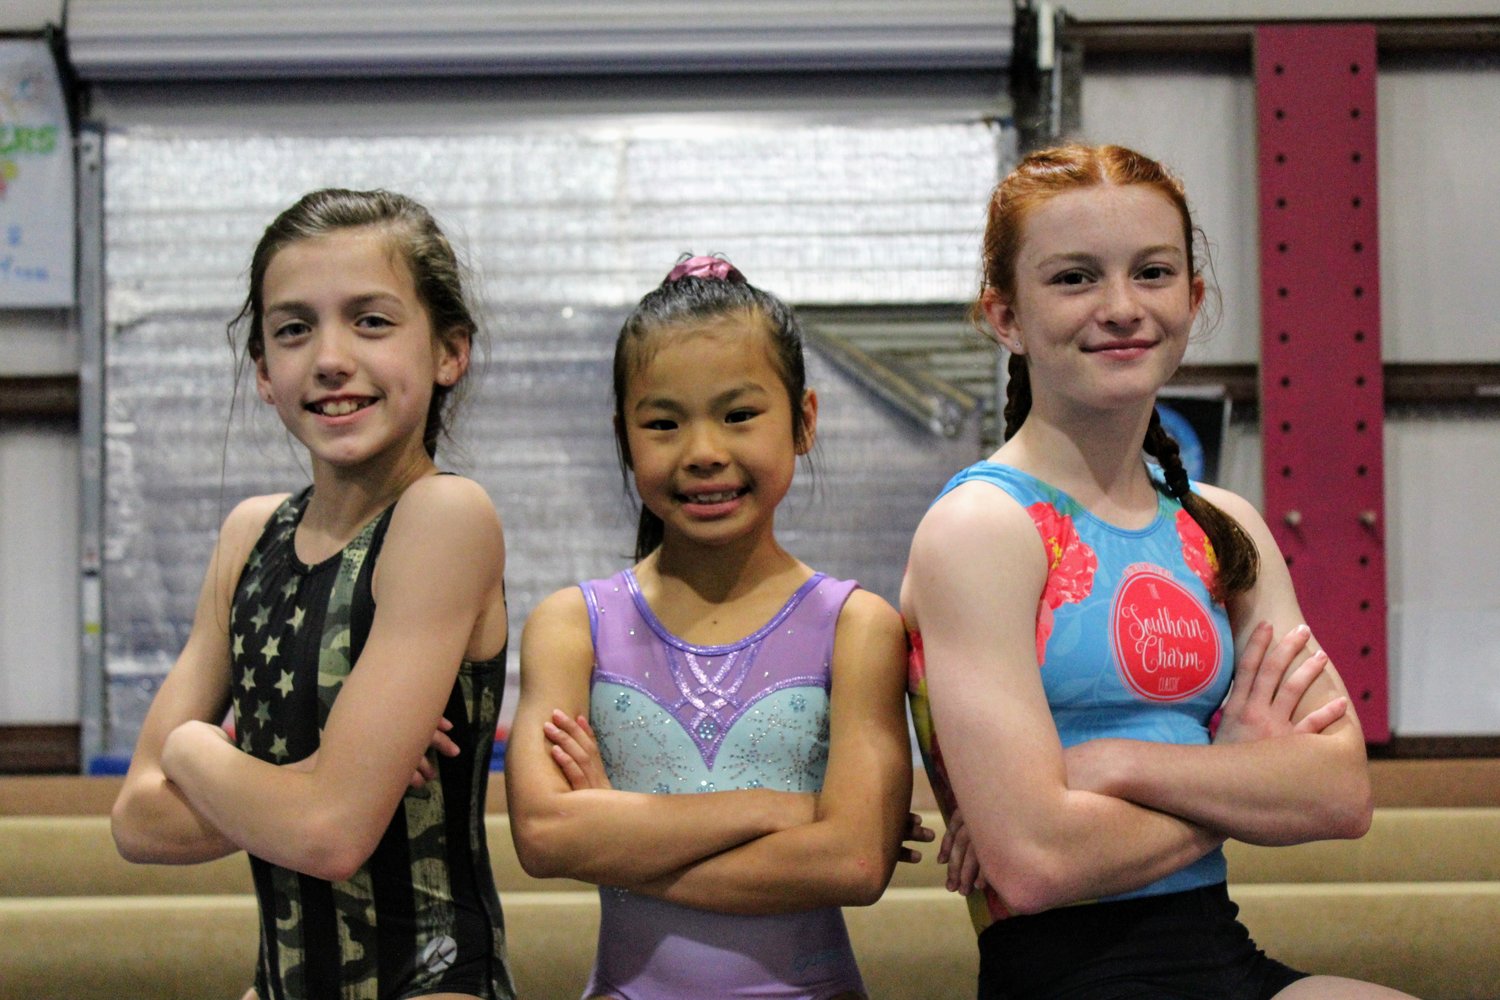 LEFT: Eastern Shore Gymnastics Academy gymnasts (from left) Rylee Cumpston, age 10 of Spanish Fort, Rosie Roberds, age 8 of Fairhope qualified for Xcel Platinum regionals and Luci LeCroy, age 11 of Fairhope, qualified for Xcel Gold regionals.